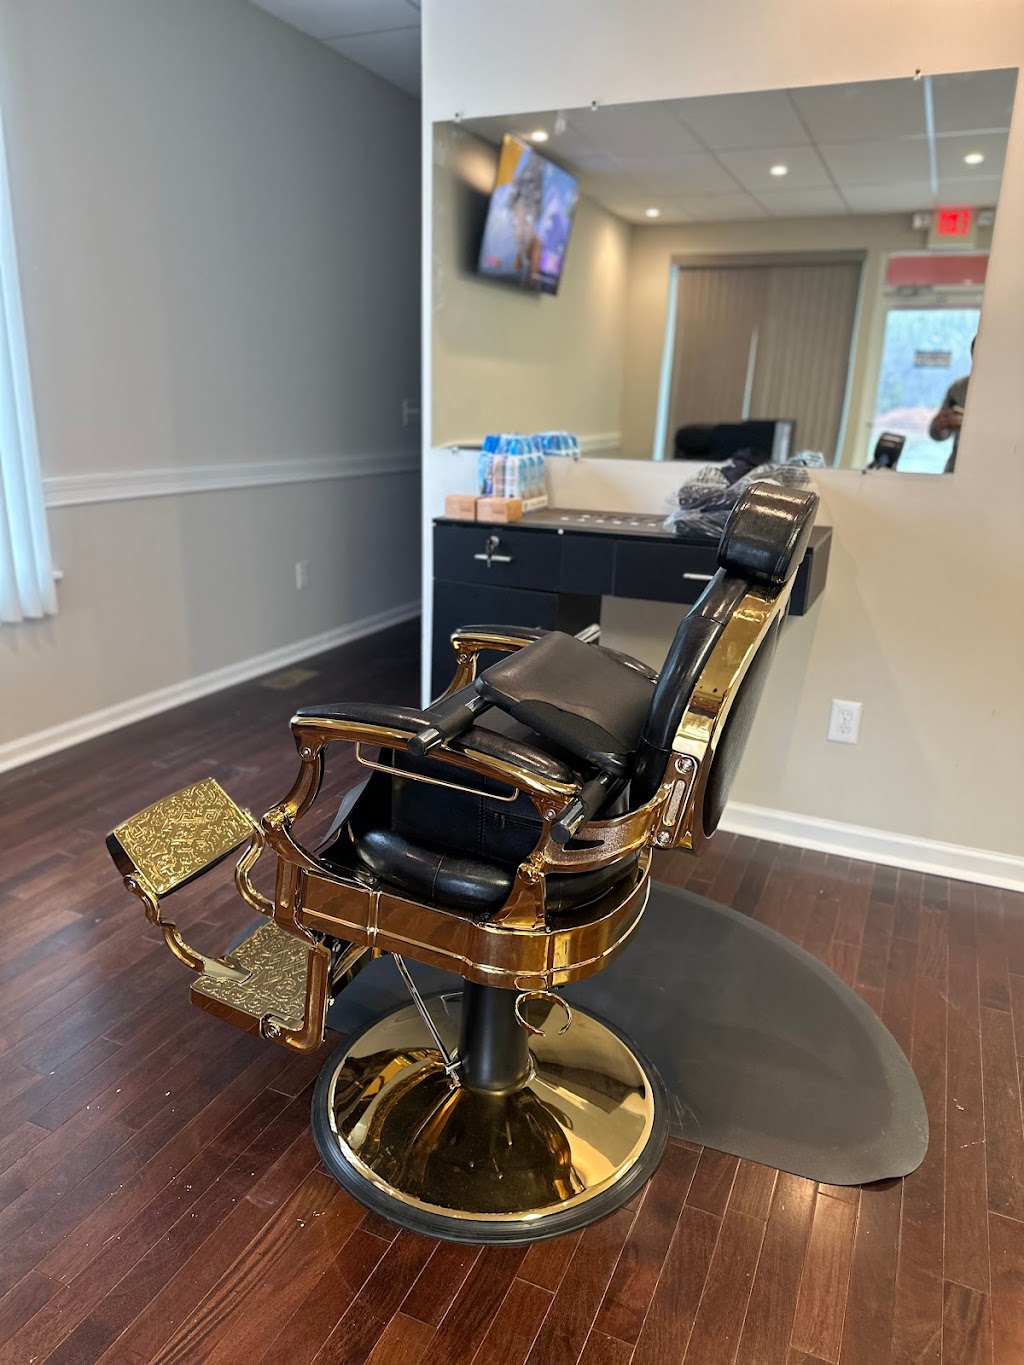 JustaIcon Barber Lounge | 1206 Woodlane Rd, Mt Holly, NJ 08060 | Phone: (609) 667-7093